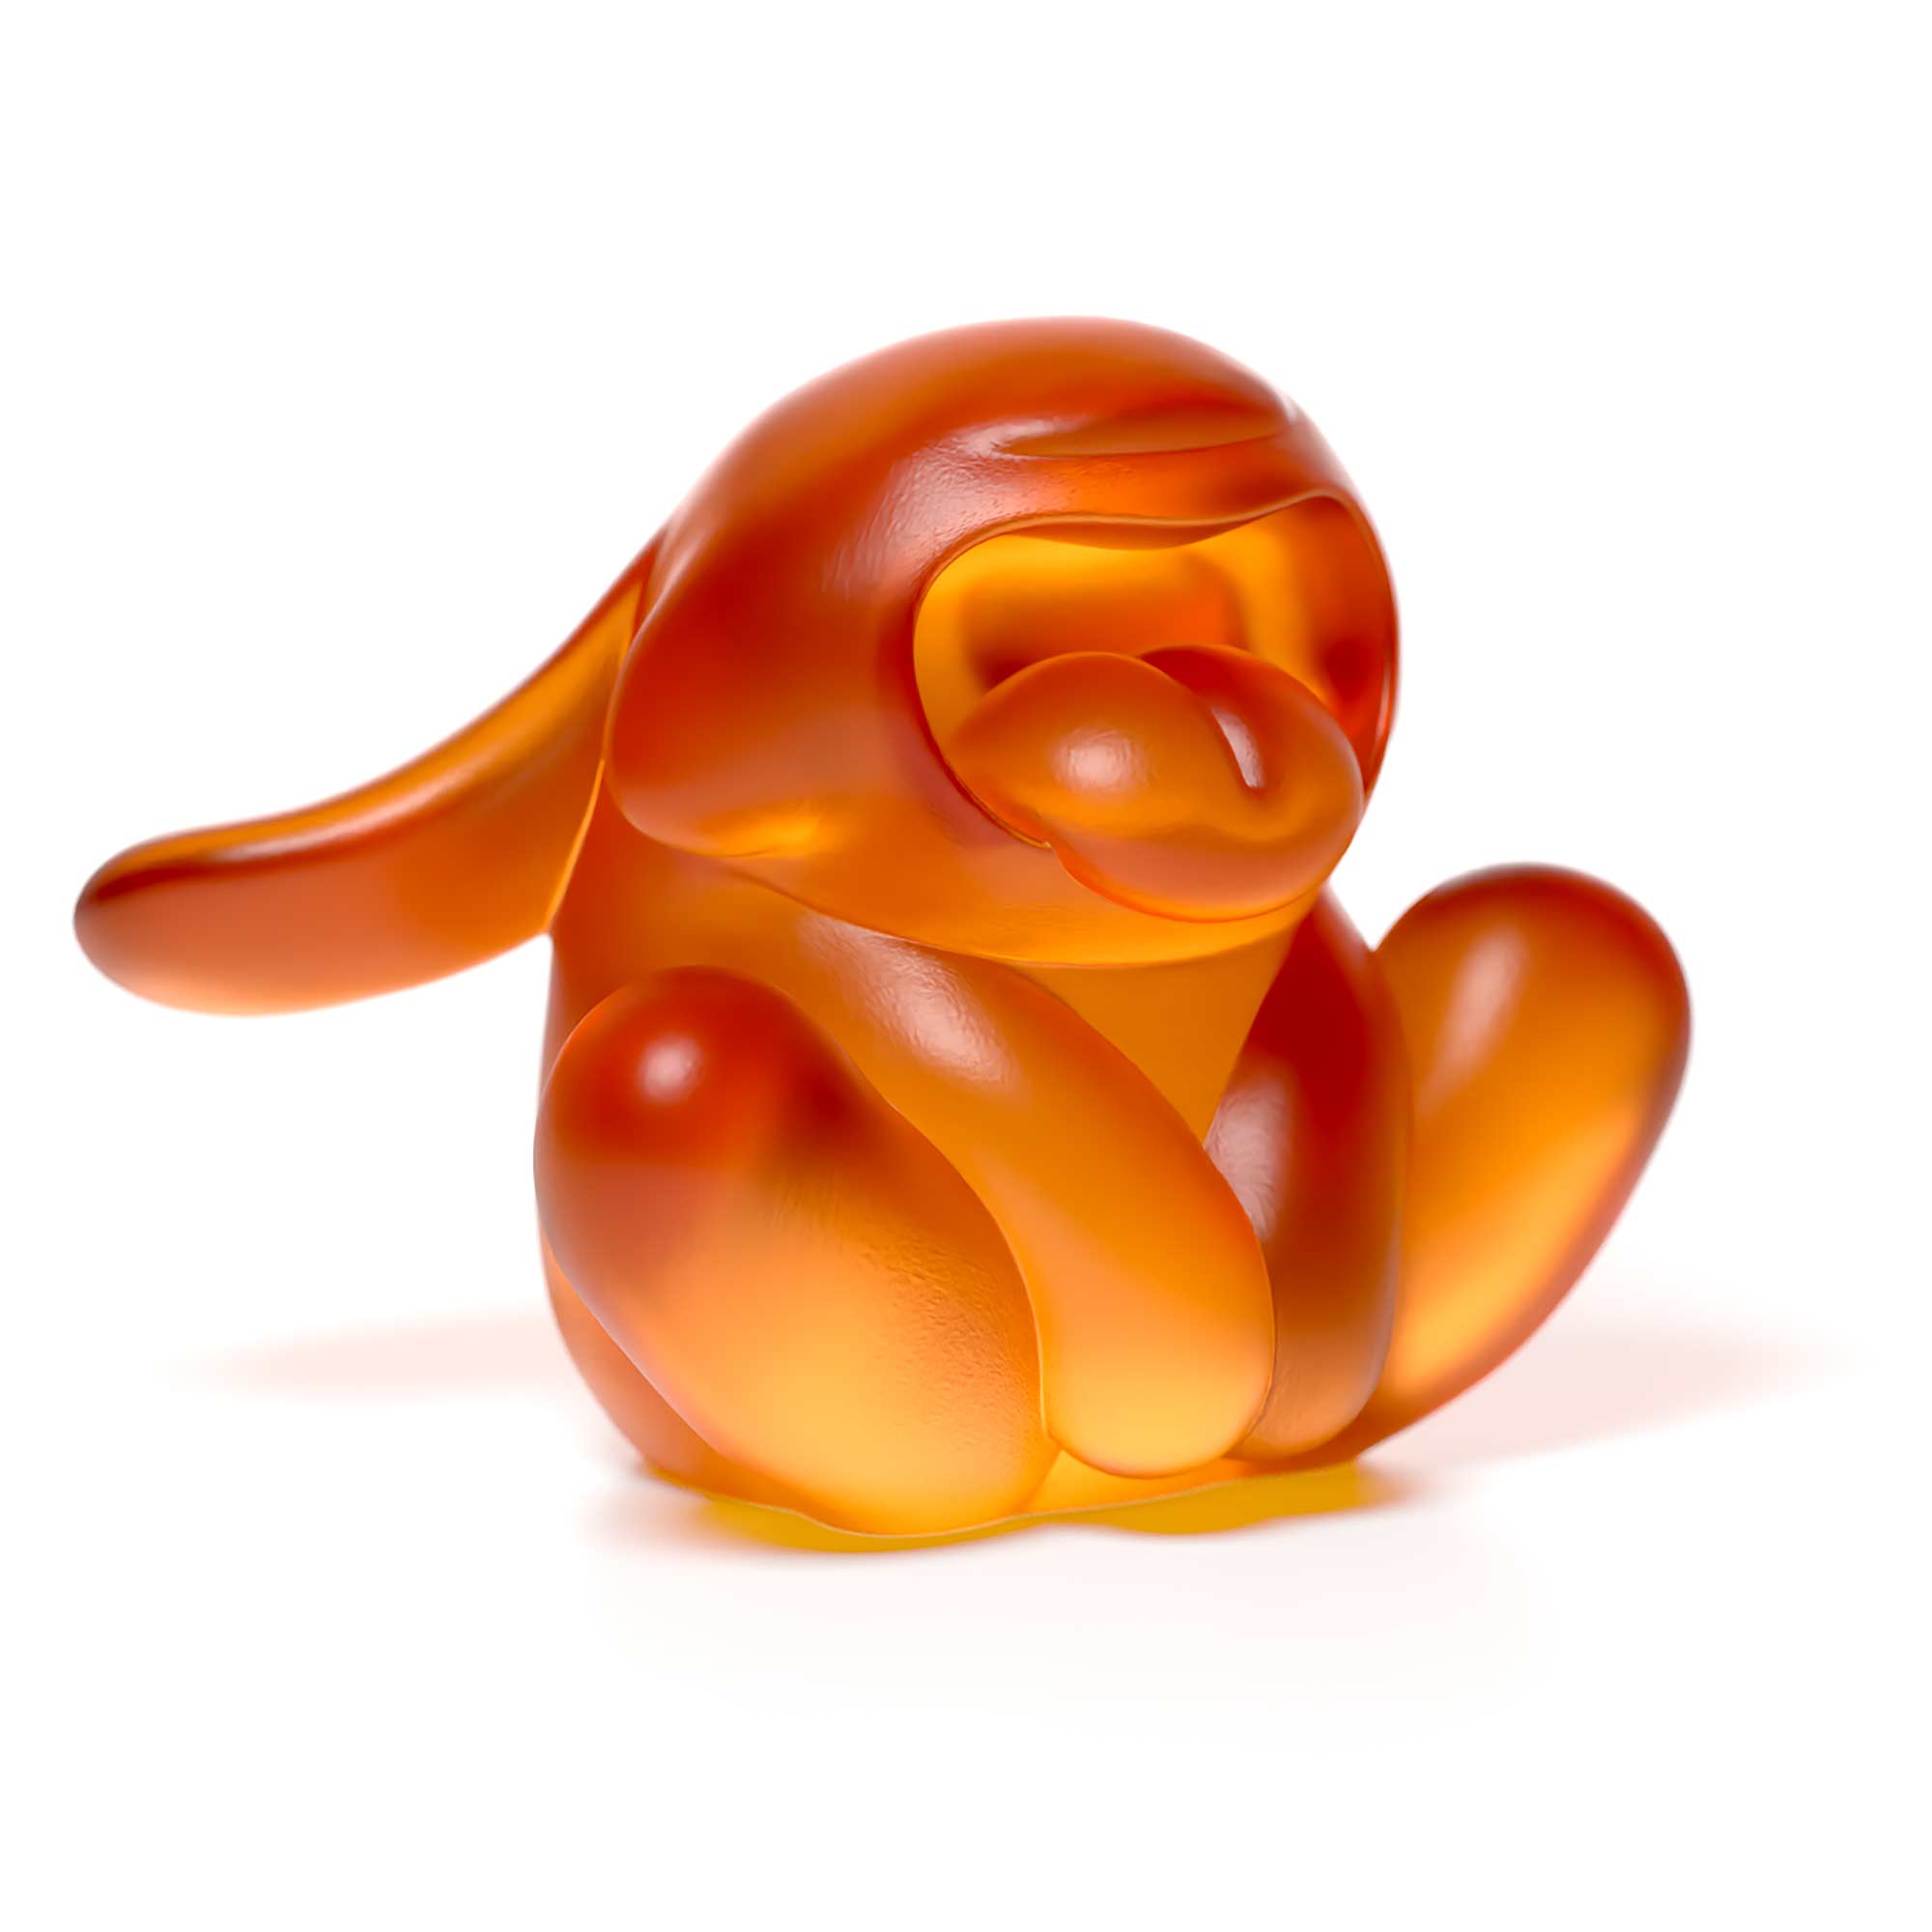 "Bunnie Roar Crystal," a sculpture, amber color, is an artistic creation by Ferdi B Dick 04, 45 degree vire